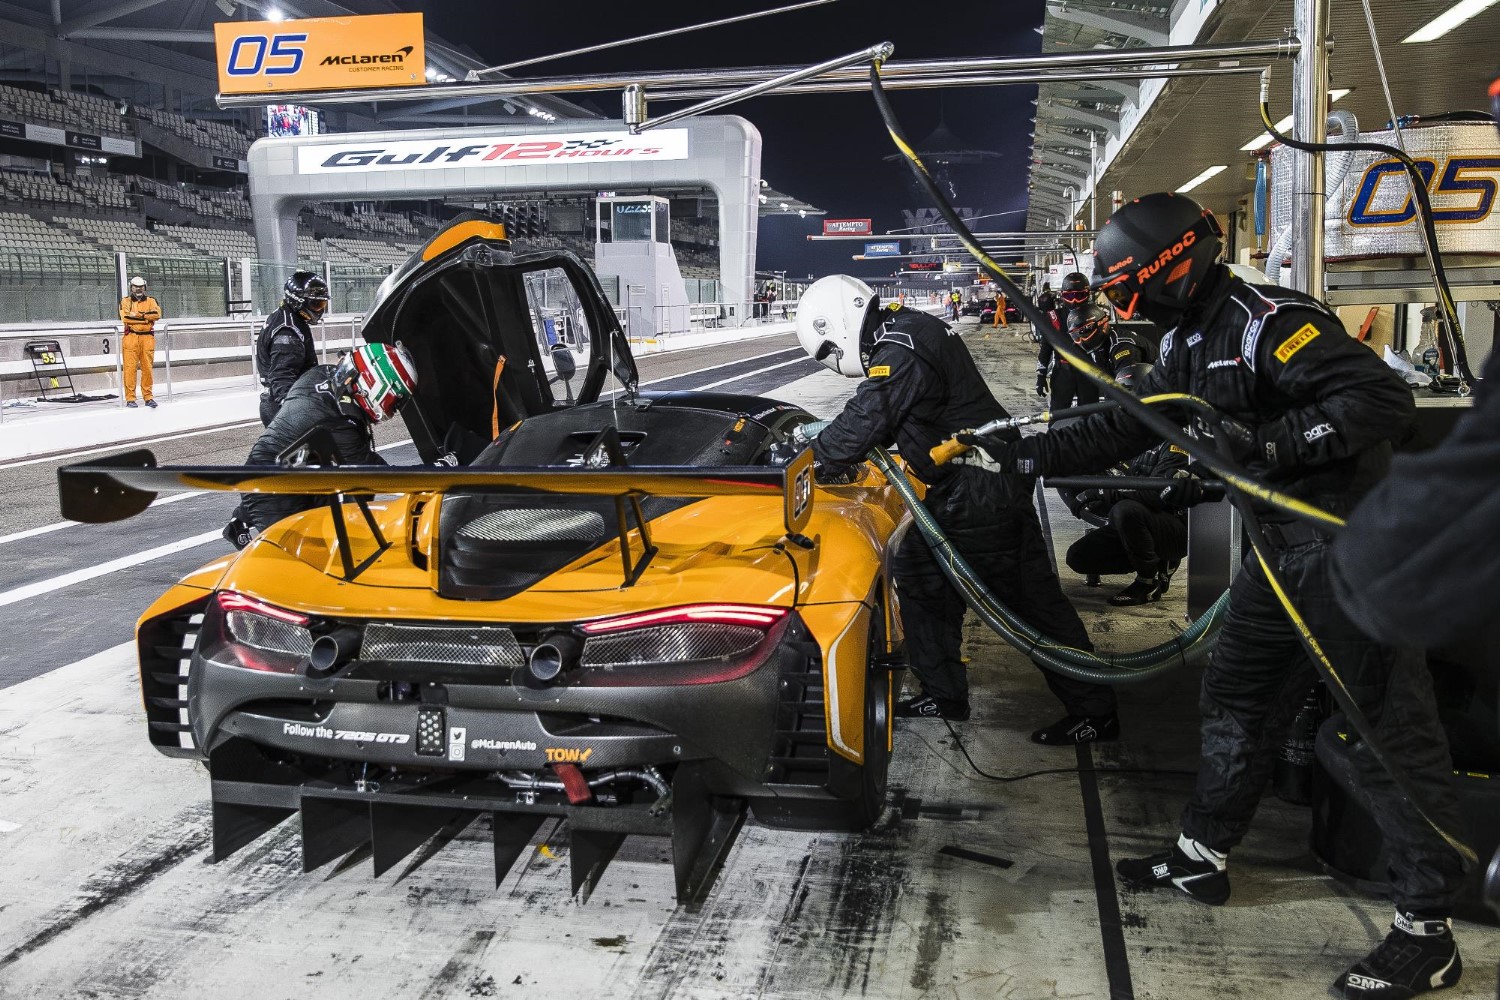 McLaren 720S GT3 comes in for pitstop. Note the packed grandstands